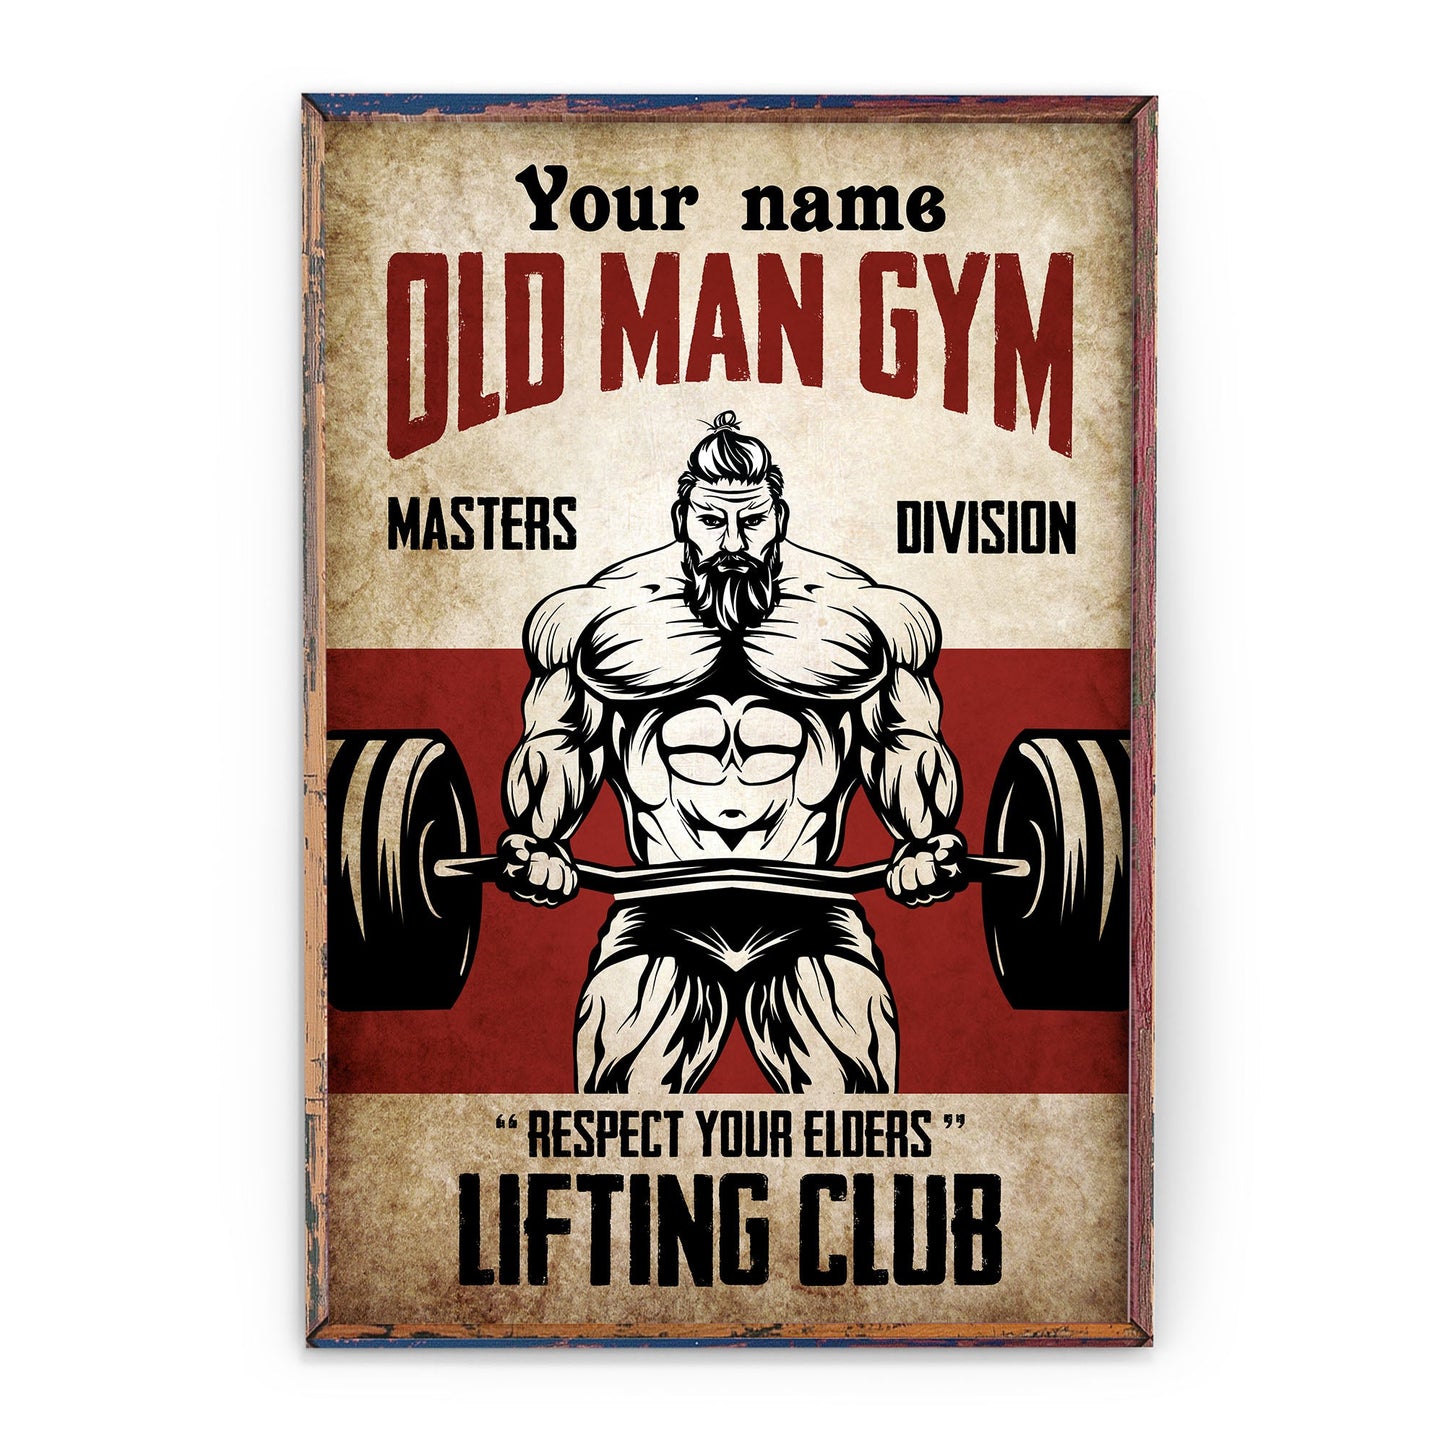 Gym Lover Gifts For Men Women Left Gym To Be Here | Poster